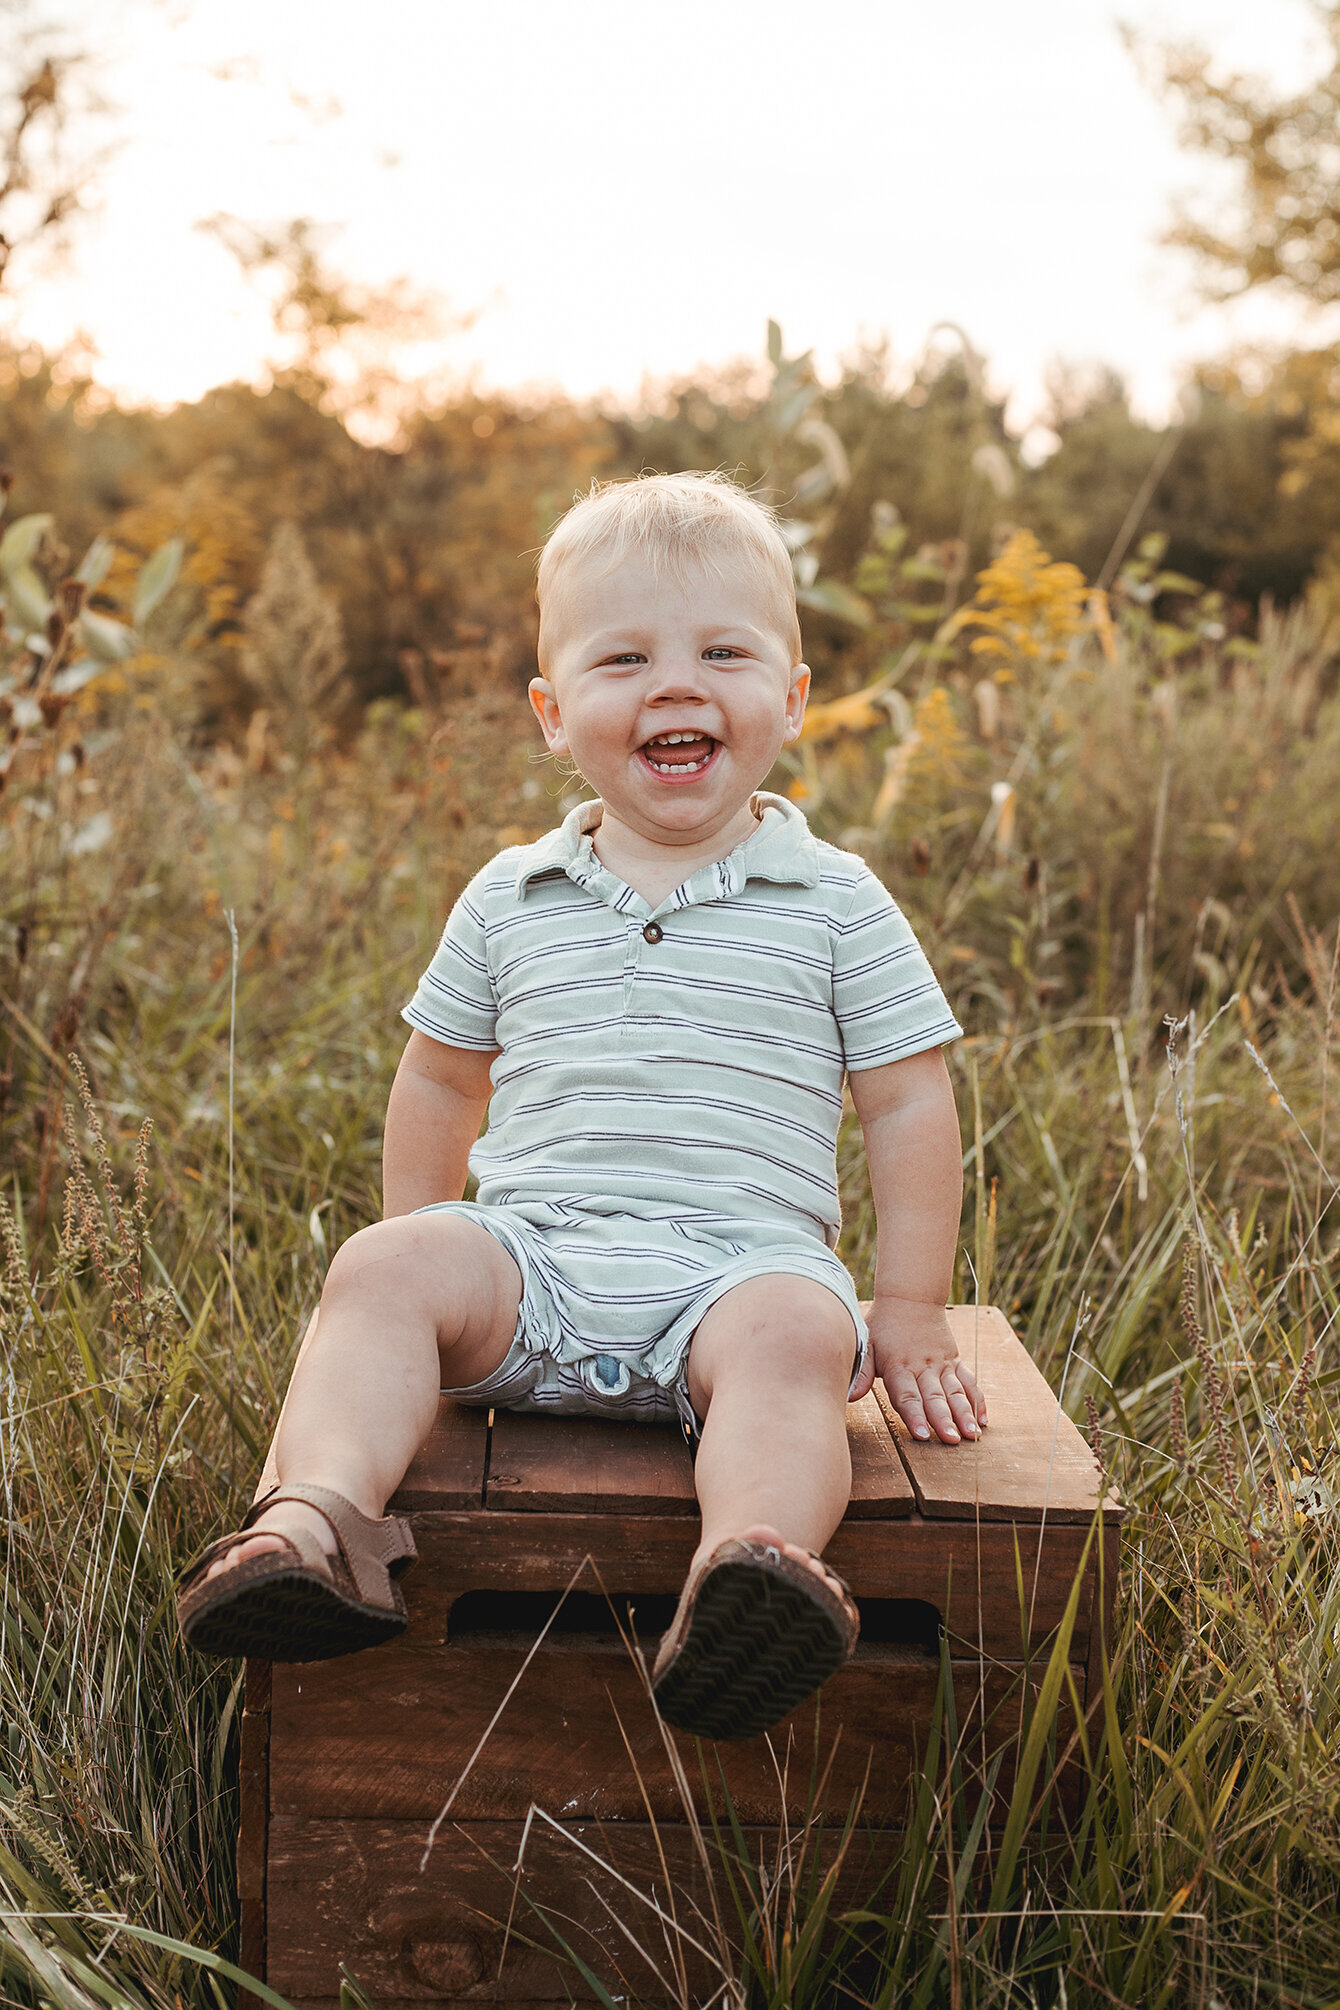 Little boy sitting on a wooden crate in the middle of a meadow. Sun is setting. The toddler is broadly laughing at the camera. Childhood Photography.